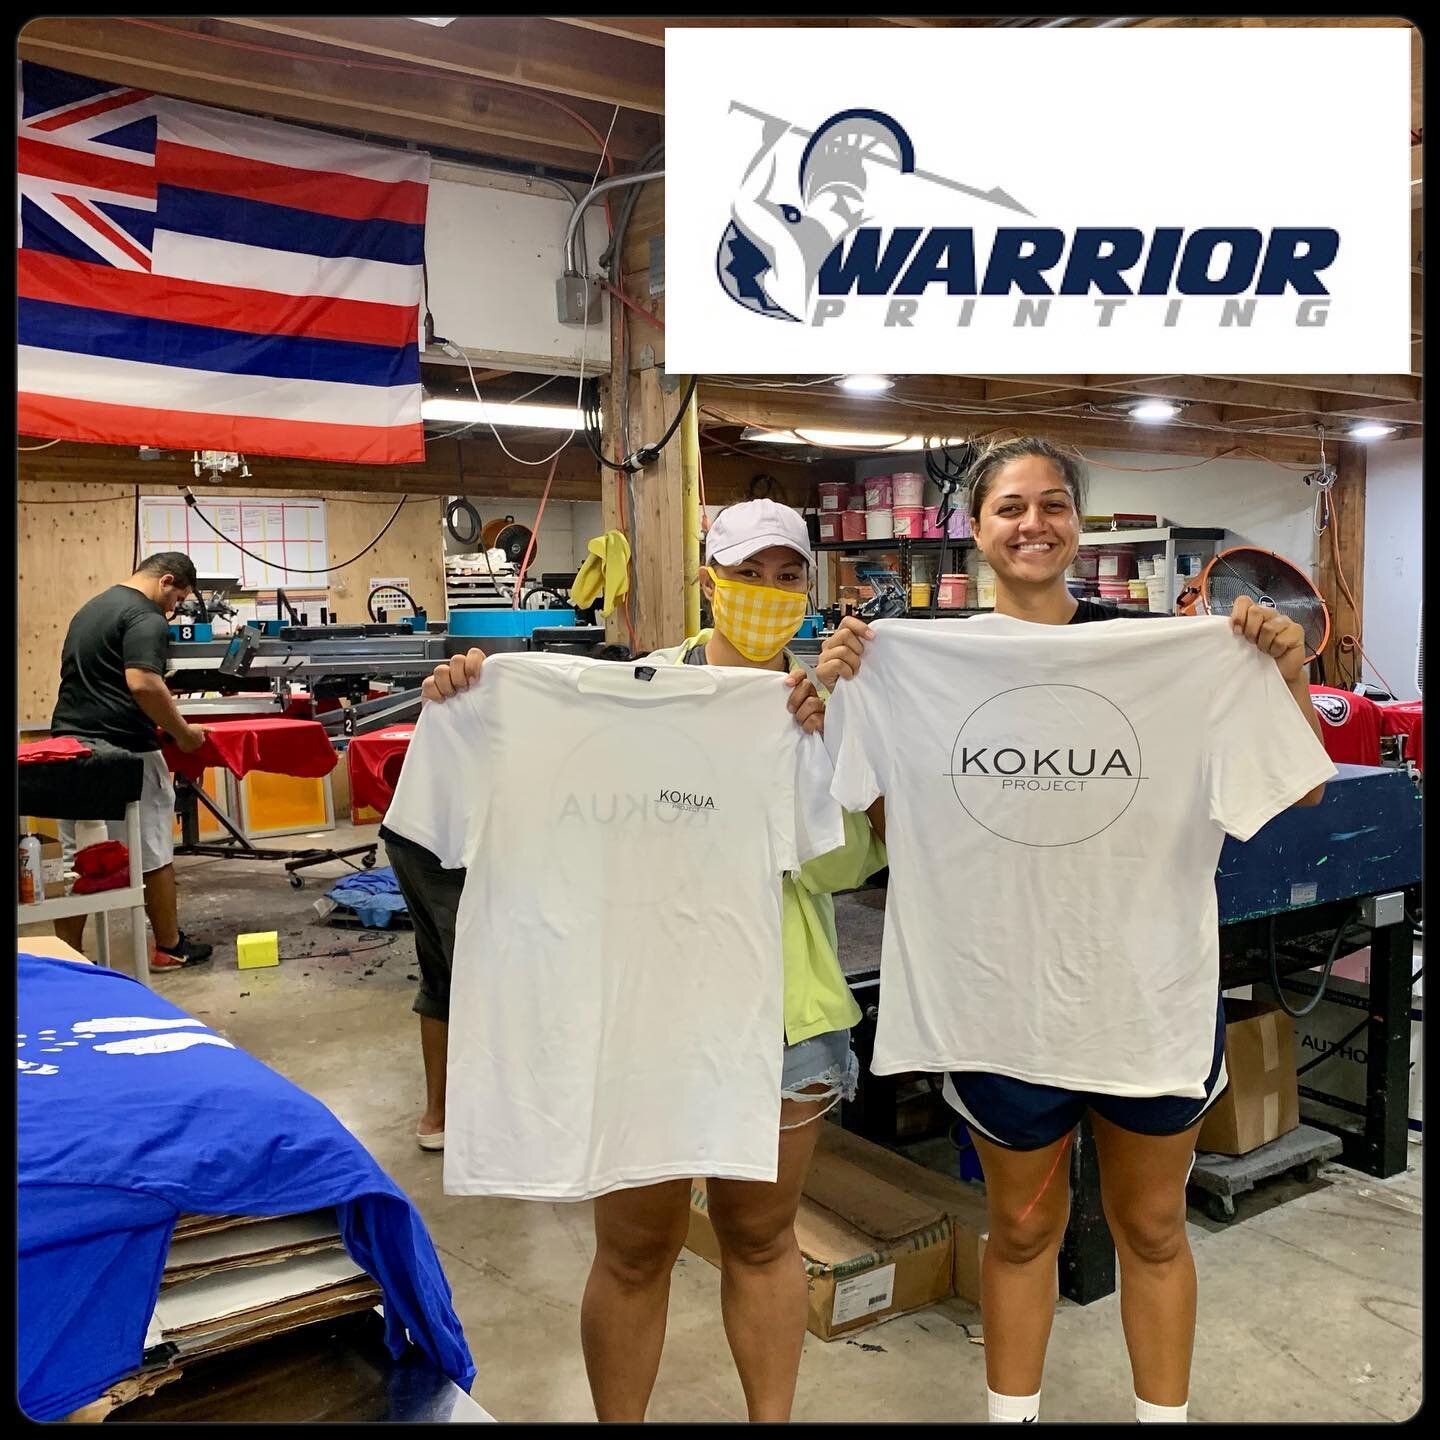 Big mahalo to @warriorprinting for the awesome deals and amazing service!  Go see Sana for all your printing needs! \!!!/ #warriorprintinghawaii #kokuaproject #supportlocal #hawaiinonprofit